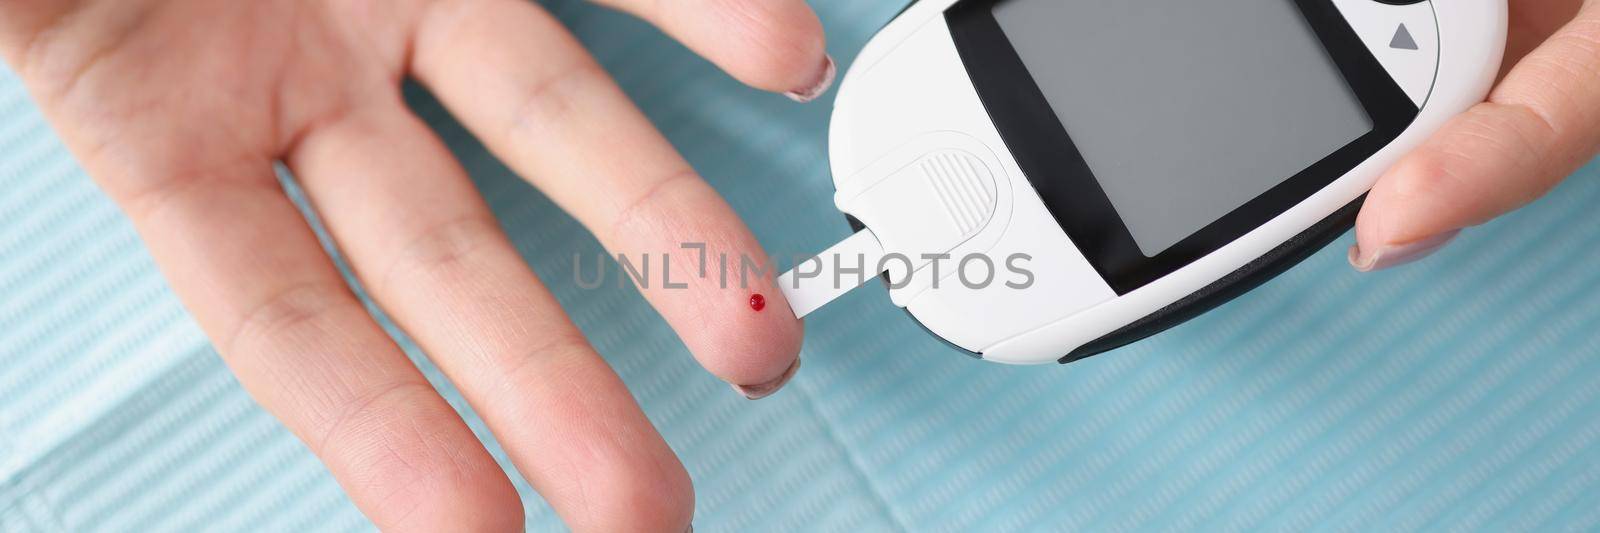 Close-up of female hands holding glucometer with strips. Medical portable device for determining approximate concentration of glucose in blood. Diabetic using glucose meter